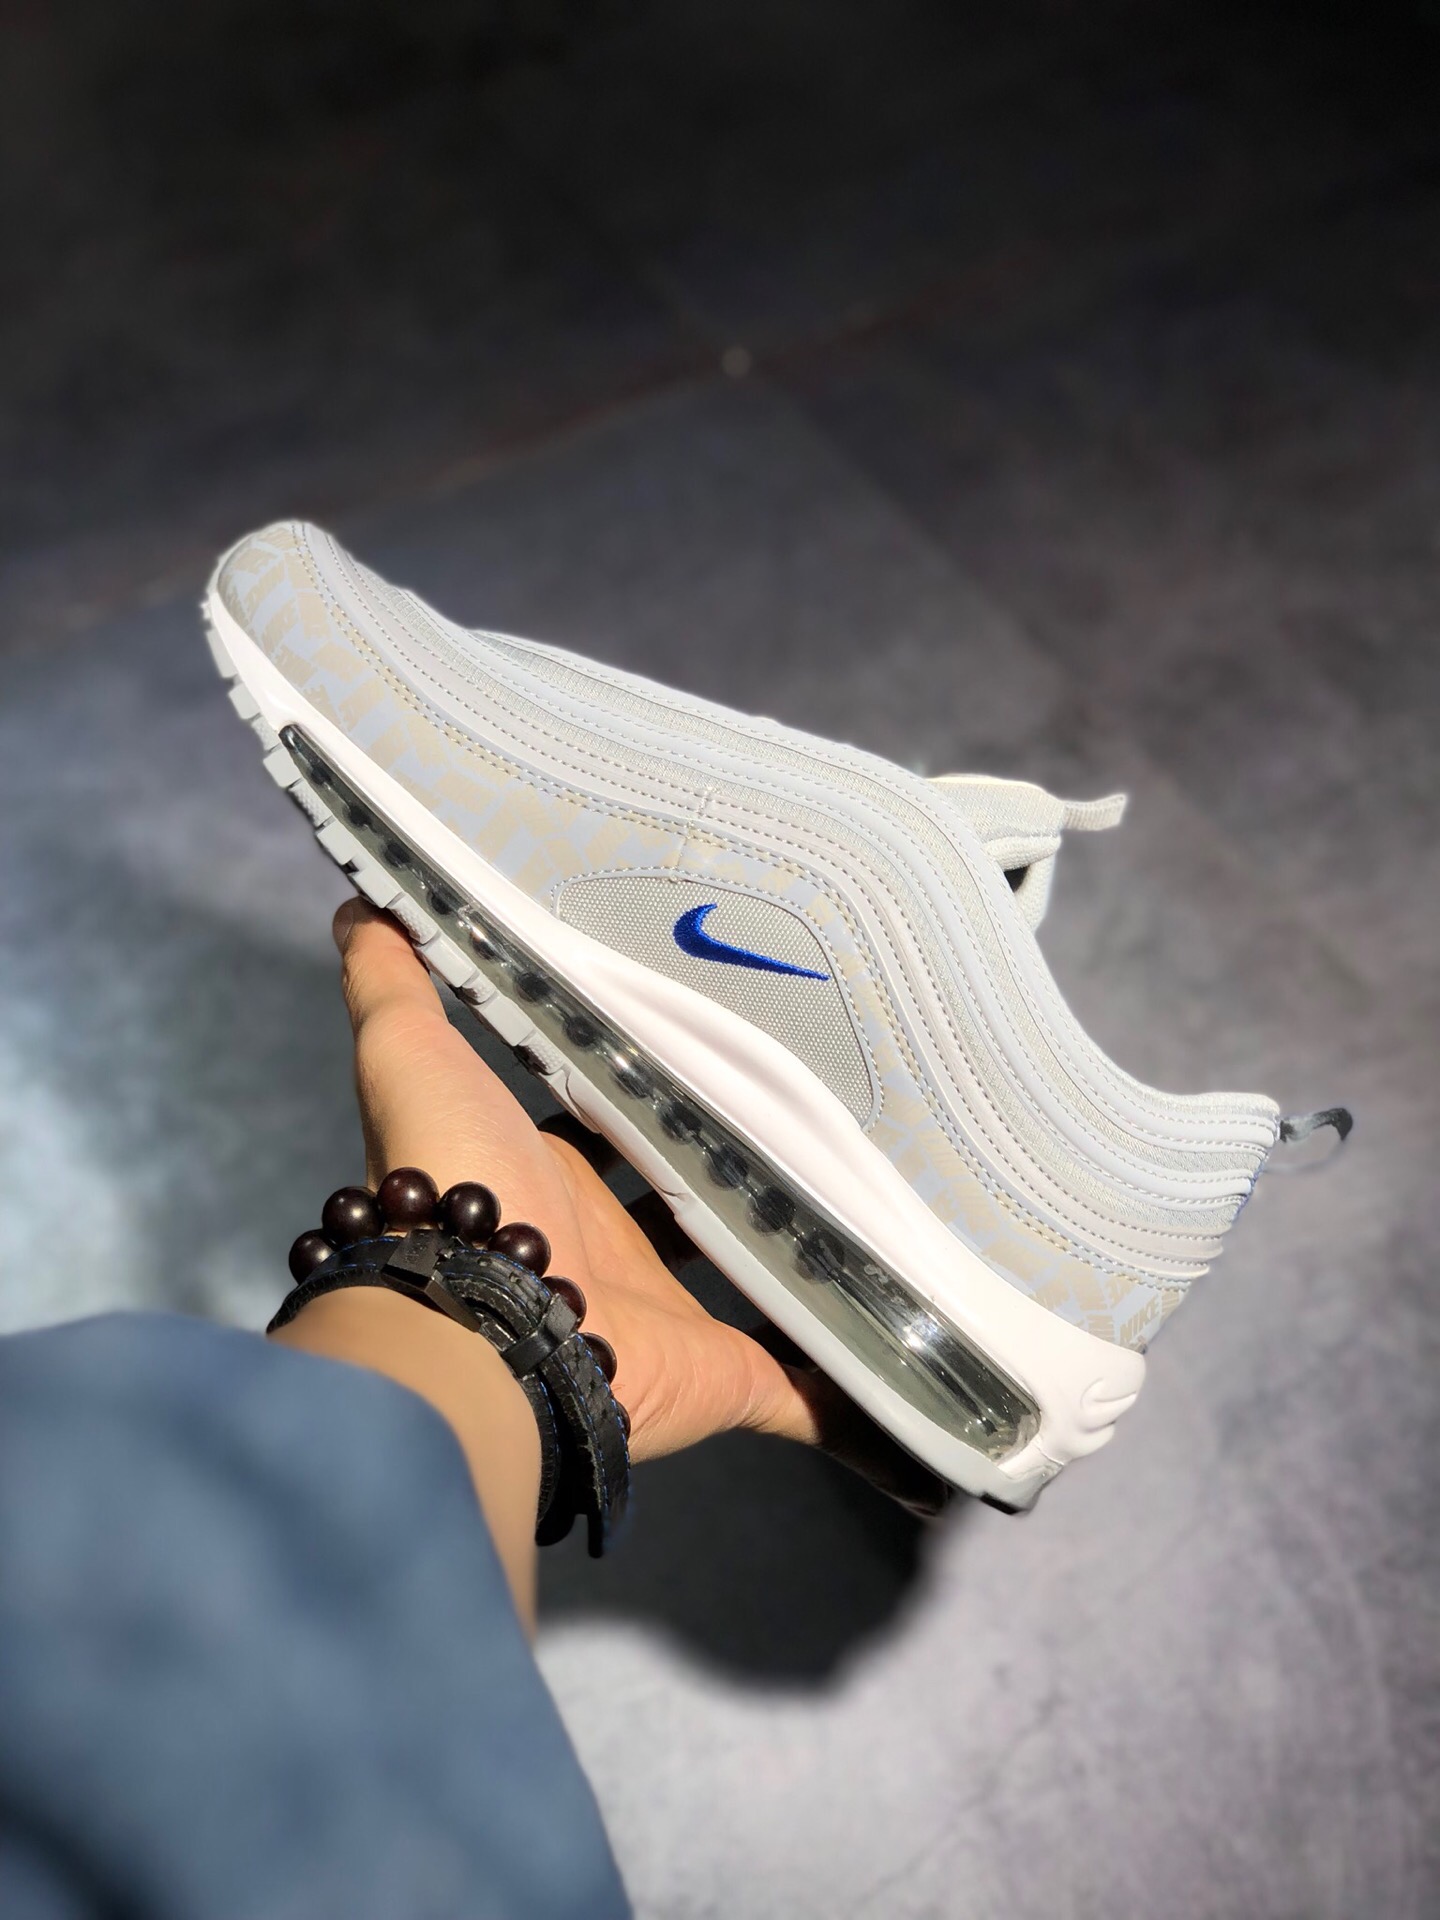 Authentic Nike Air Max 97 3M Silver